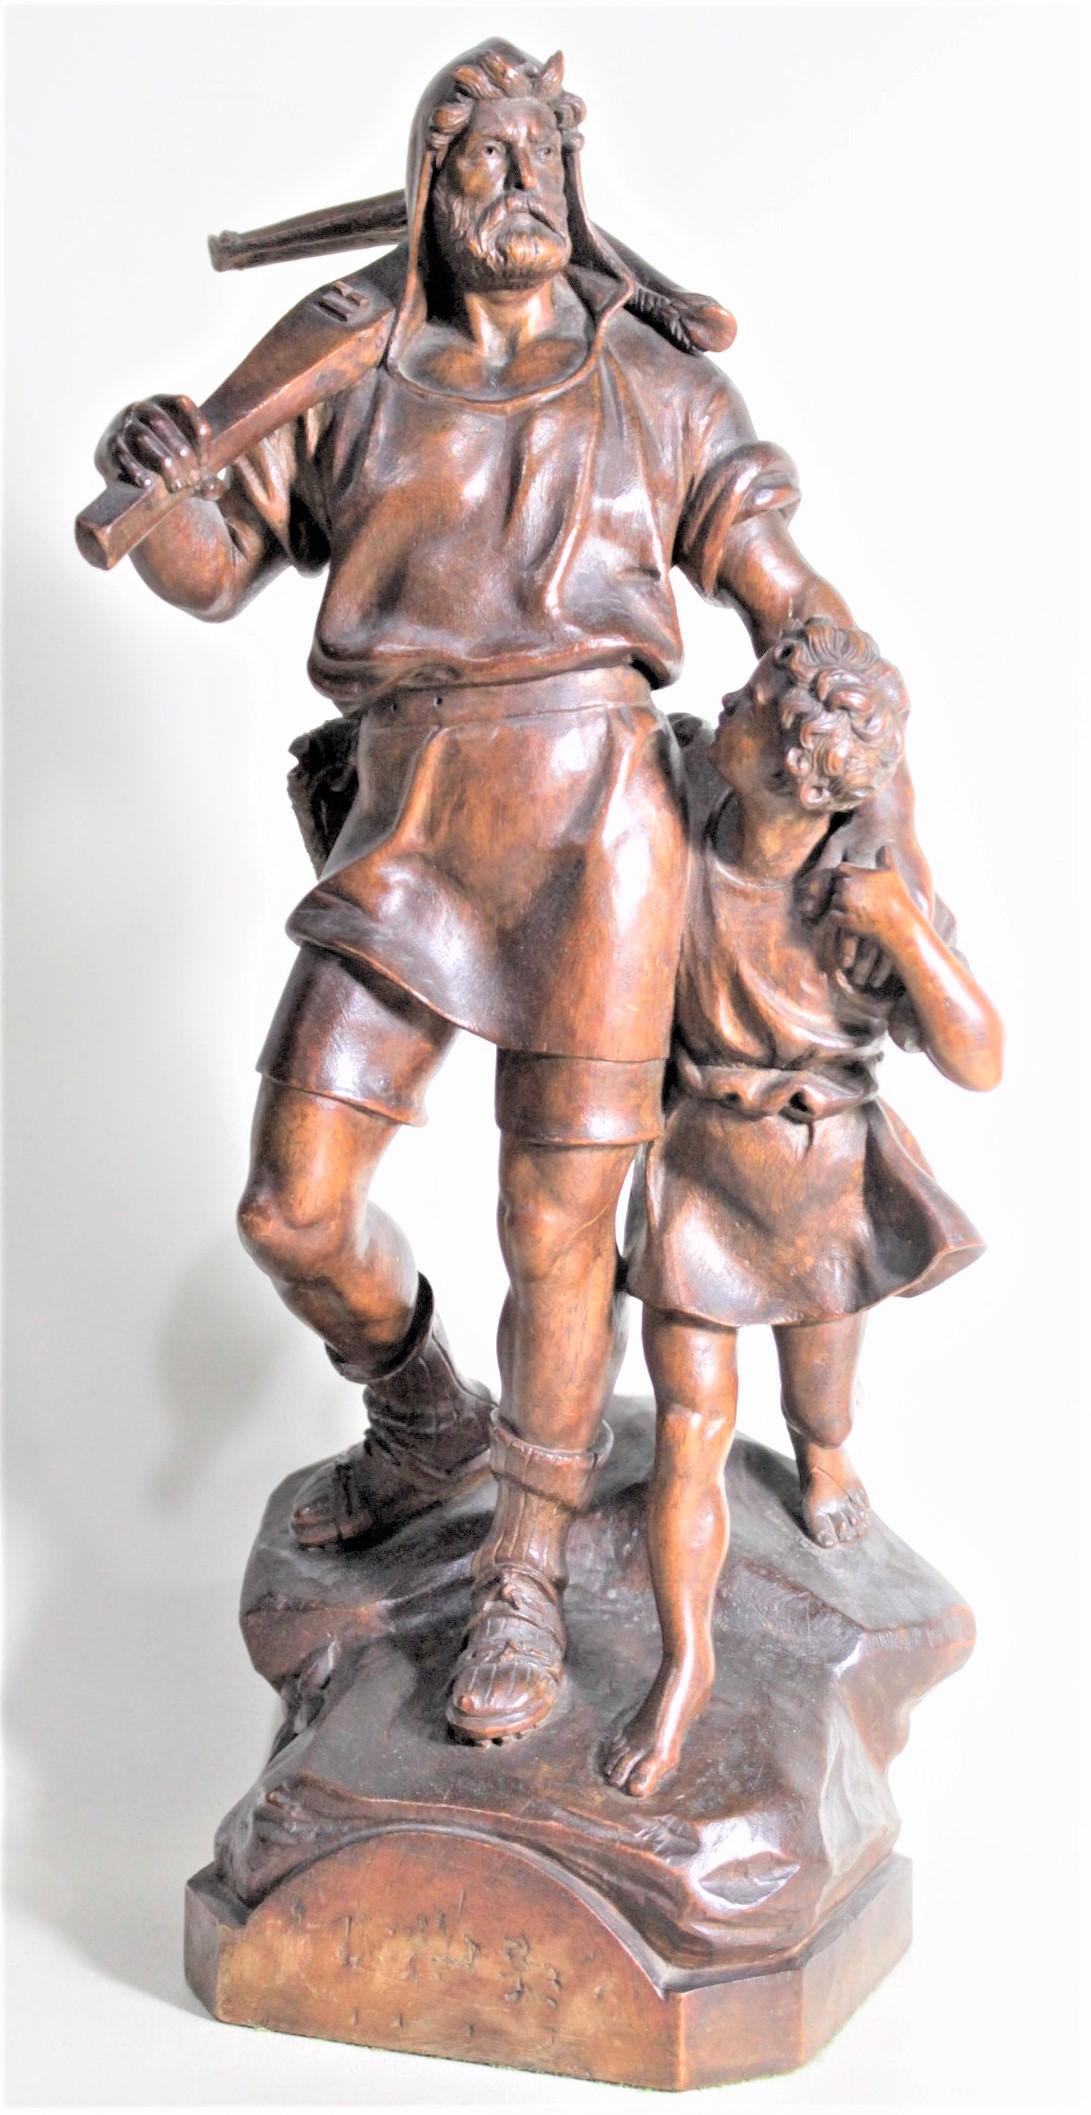 This Folk Art carved antique sculpture is unsigned, but presumed to have originated from Europe, likely Austria or Germany in the late 19th century in the period realistic style. The study depicts 'William Tell' of folklore known most notably for